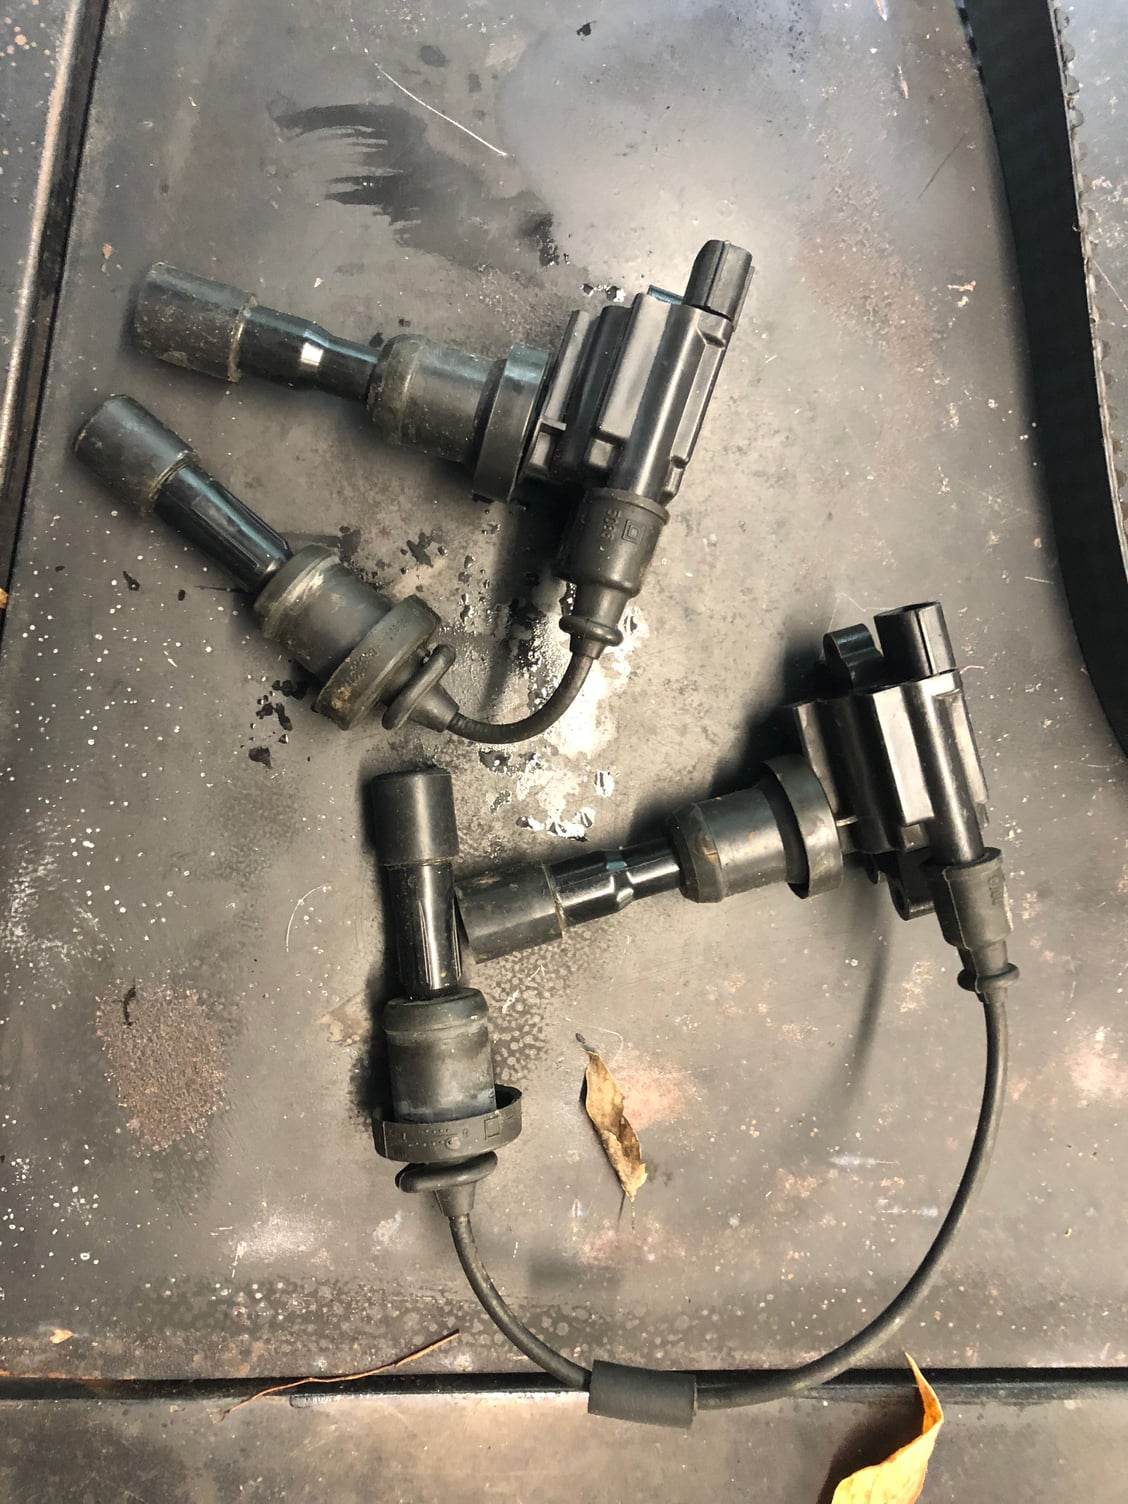 Engine - Internals - Garage clean out, help fund my build! - Used - 2003 to 2006 Mitsubishi Lancer Evolution - Knoxville, TN 37920, United States